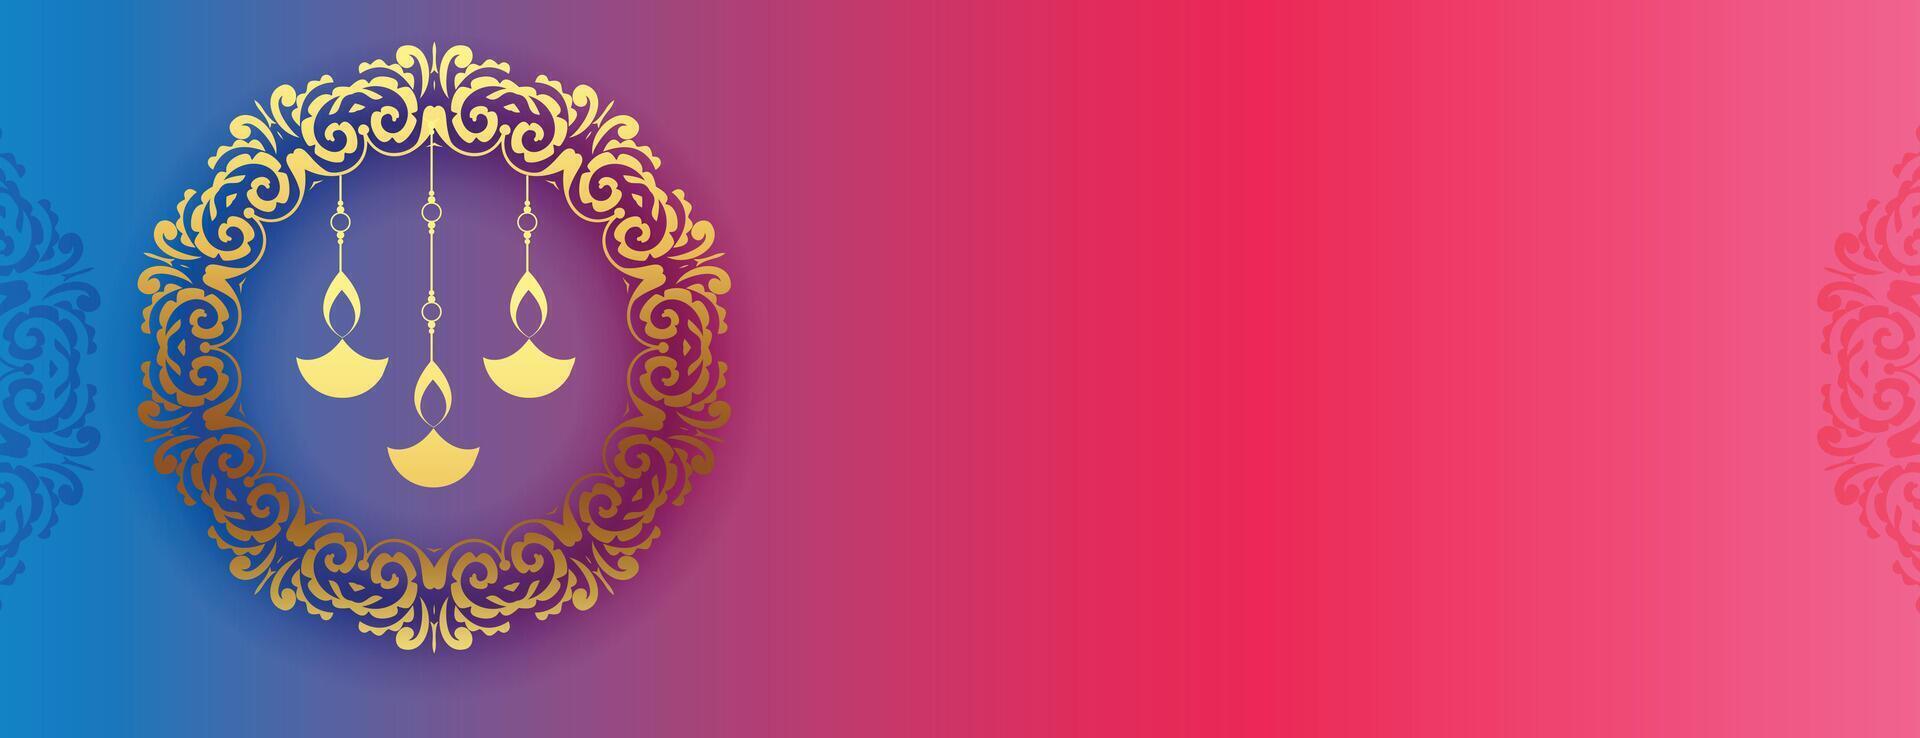 premium shubh diwali banner with text space and mandala frame vector